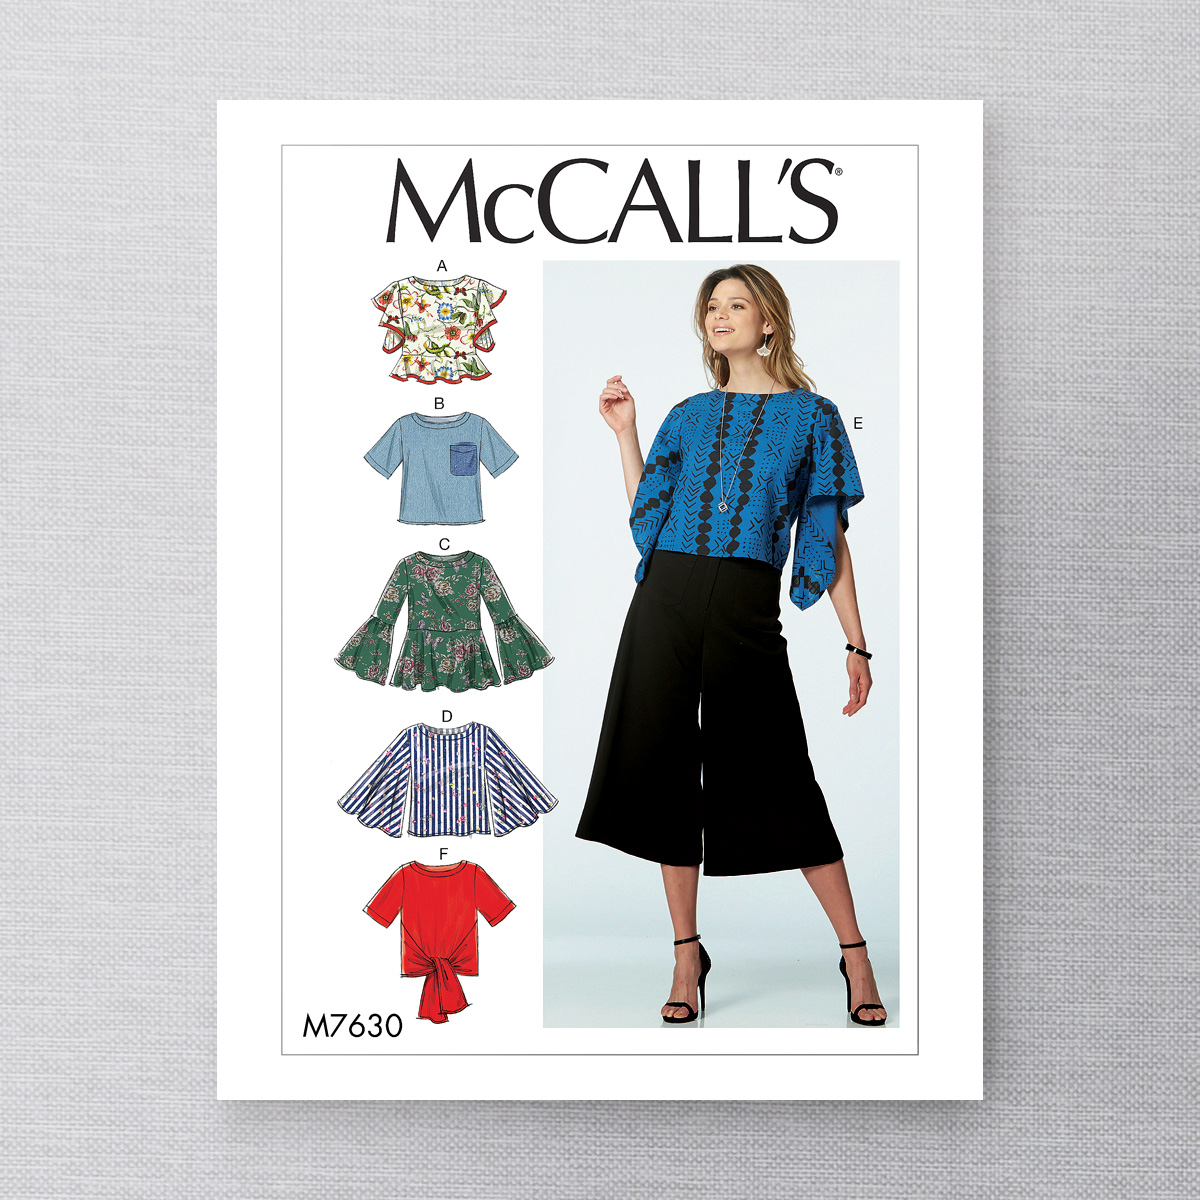 New arrivals: McCall's patterns | Clubtissus.com